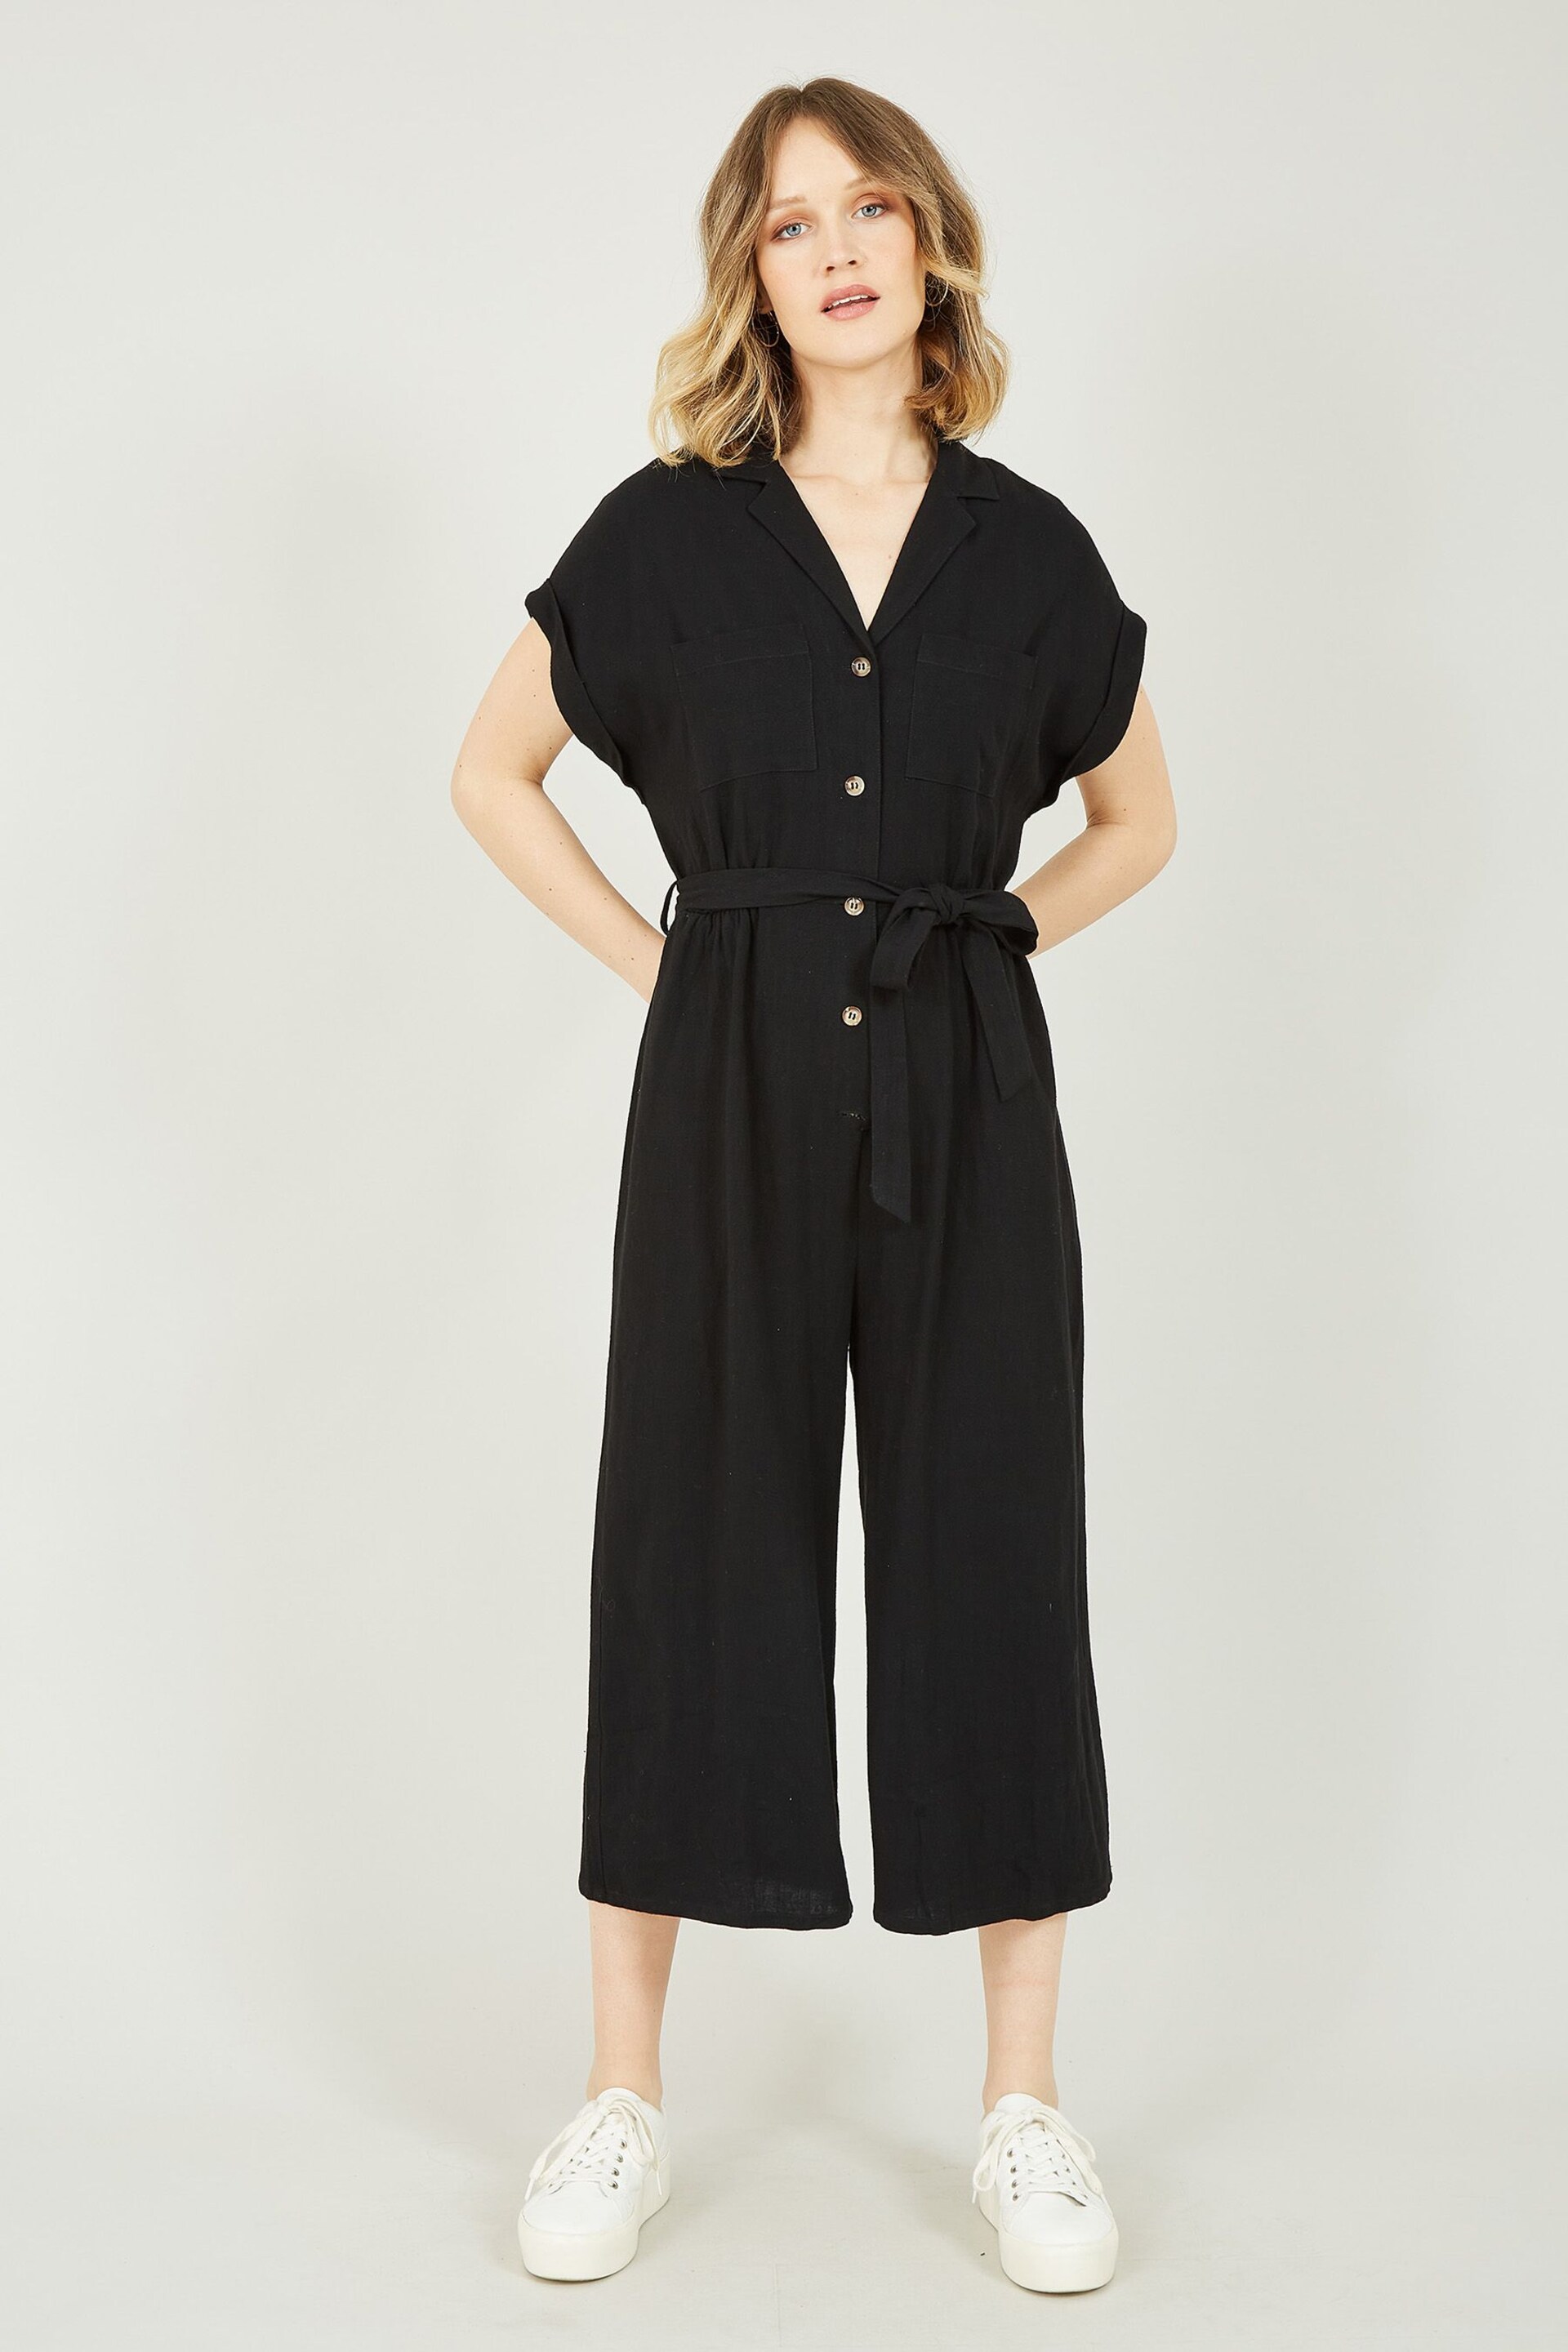 Yumi Black Button up Jumpsuit - Image 1 of 5